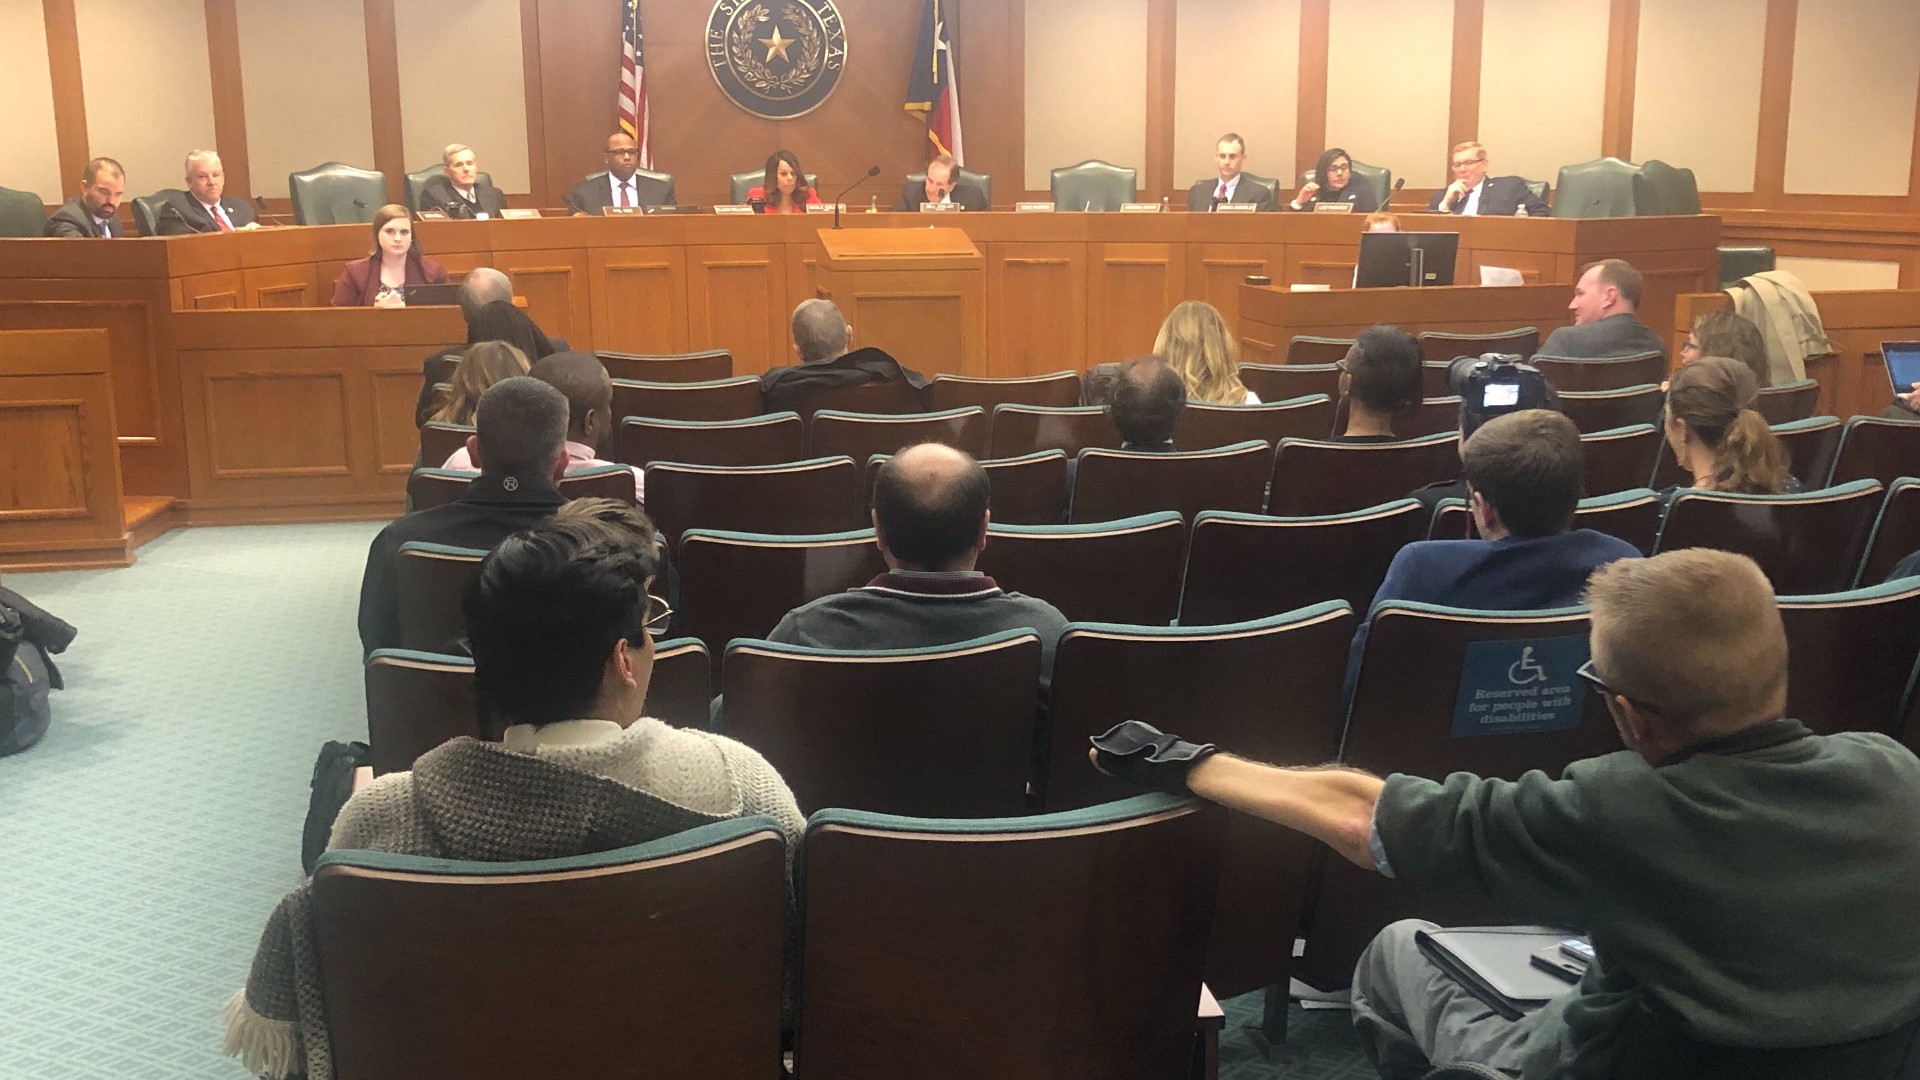 If passed, House Bill 63 would decriminalize the possession of marijuana under an ounce. A judge testified in favor of it Monday night, and several people from the law enforcement community spoke out against the bill.